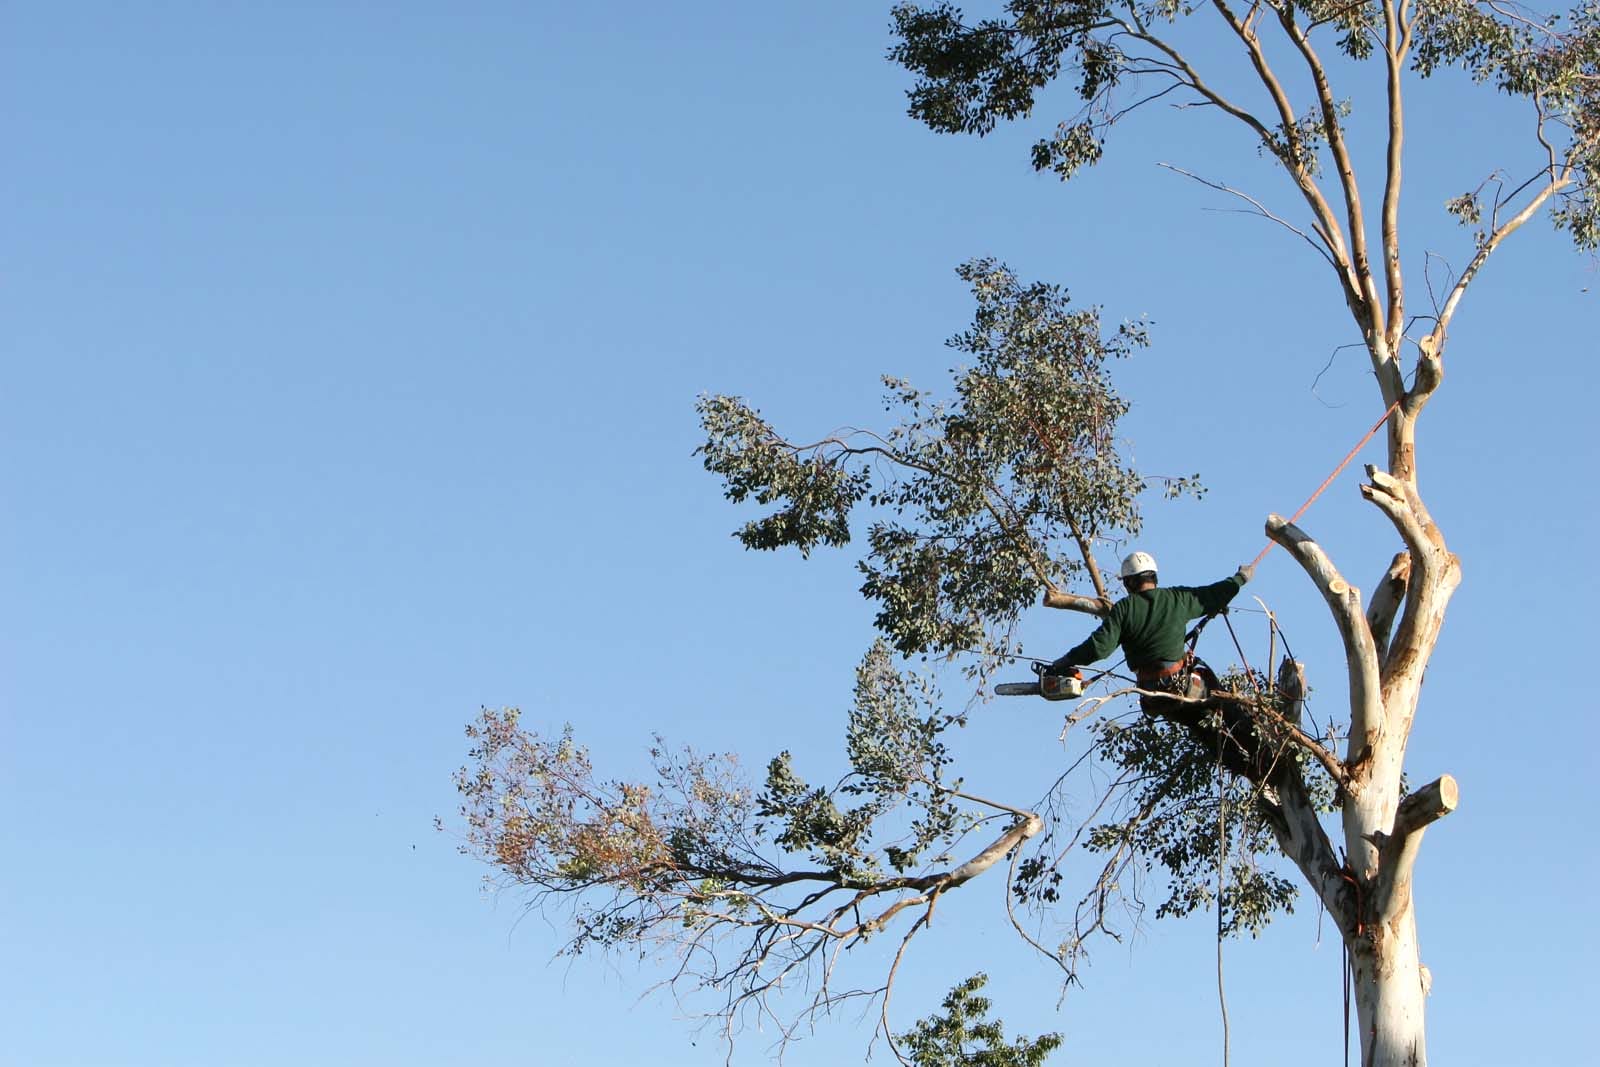 tree removal services for homeowners.